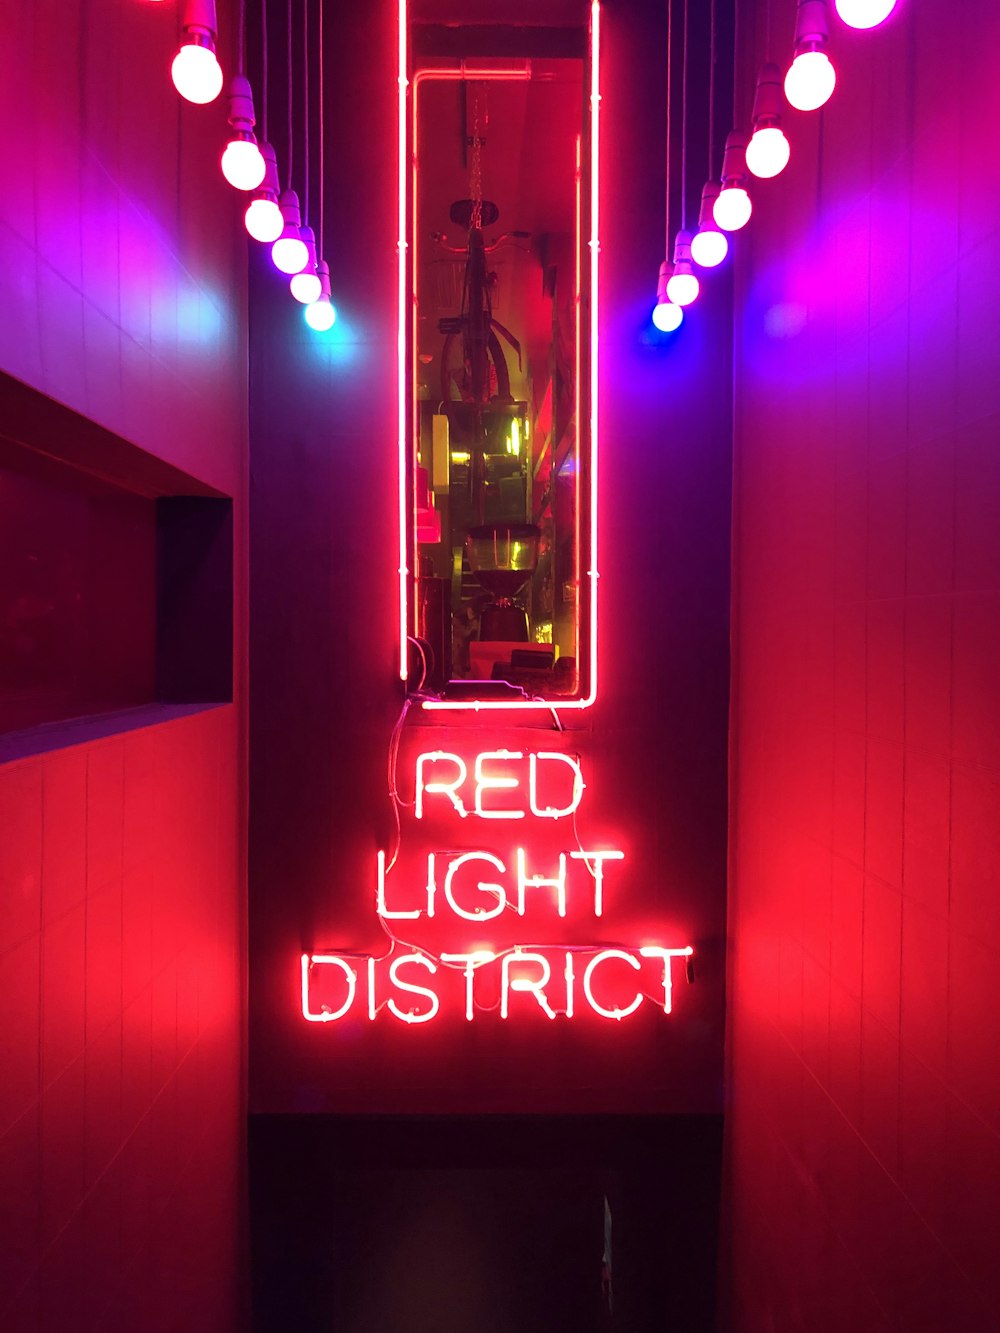 The district light is street on what red Red